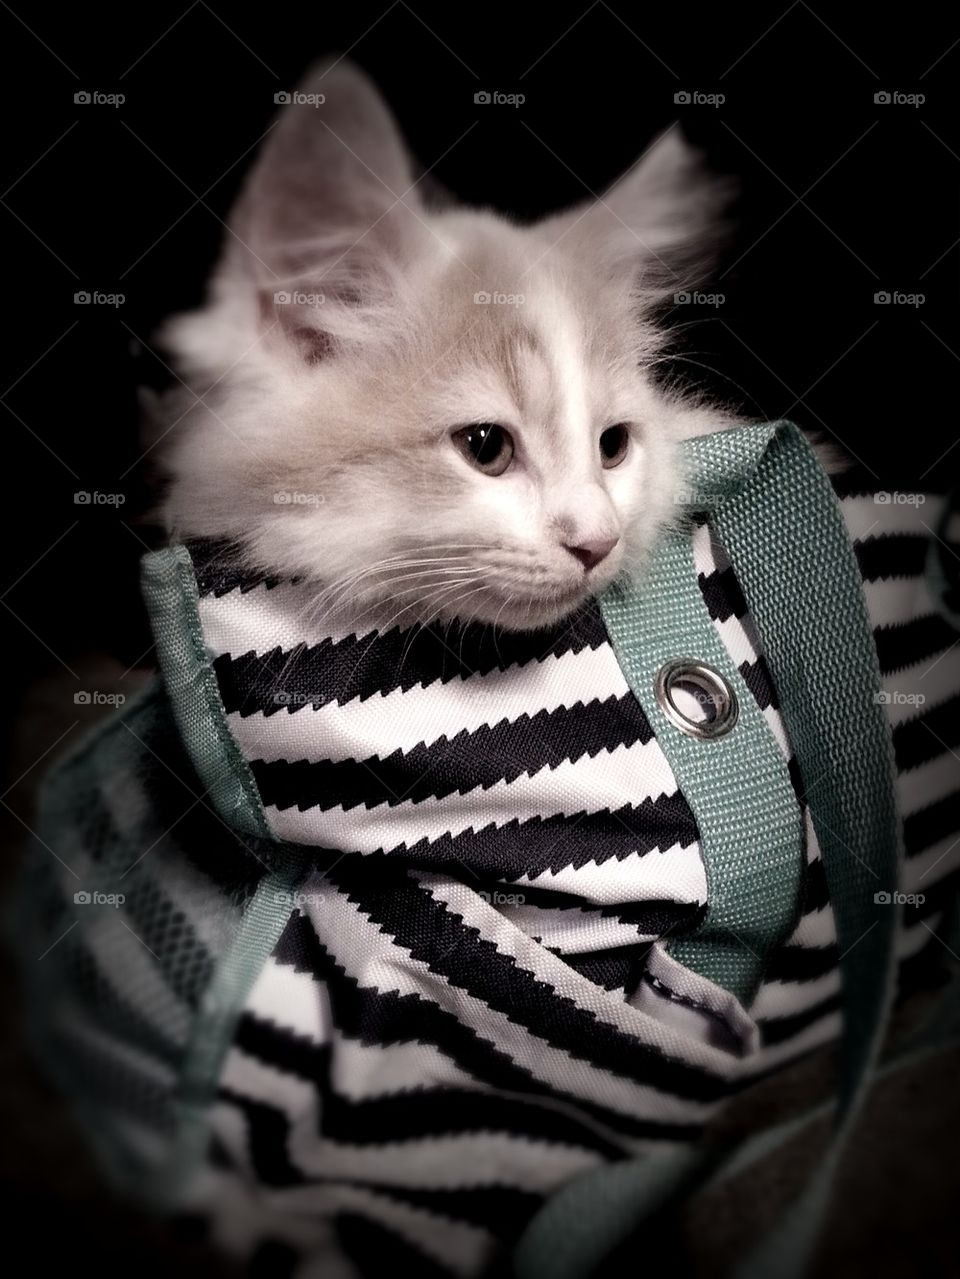 cats in the bag lol. my new kitten just jumped right into this diaper bag